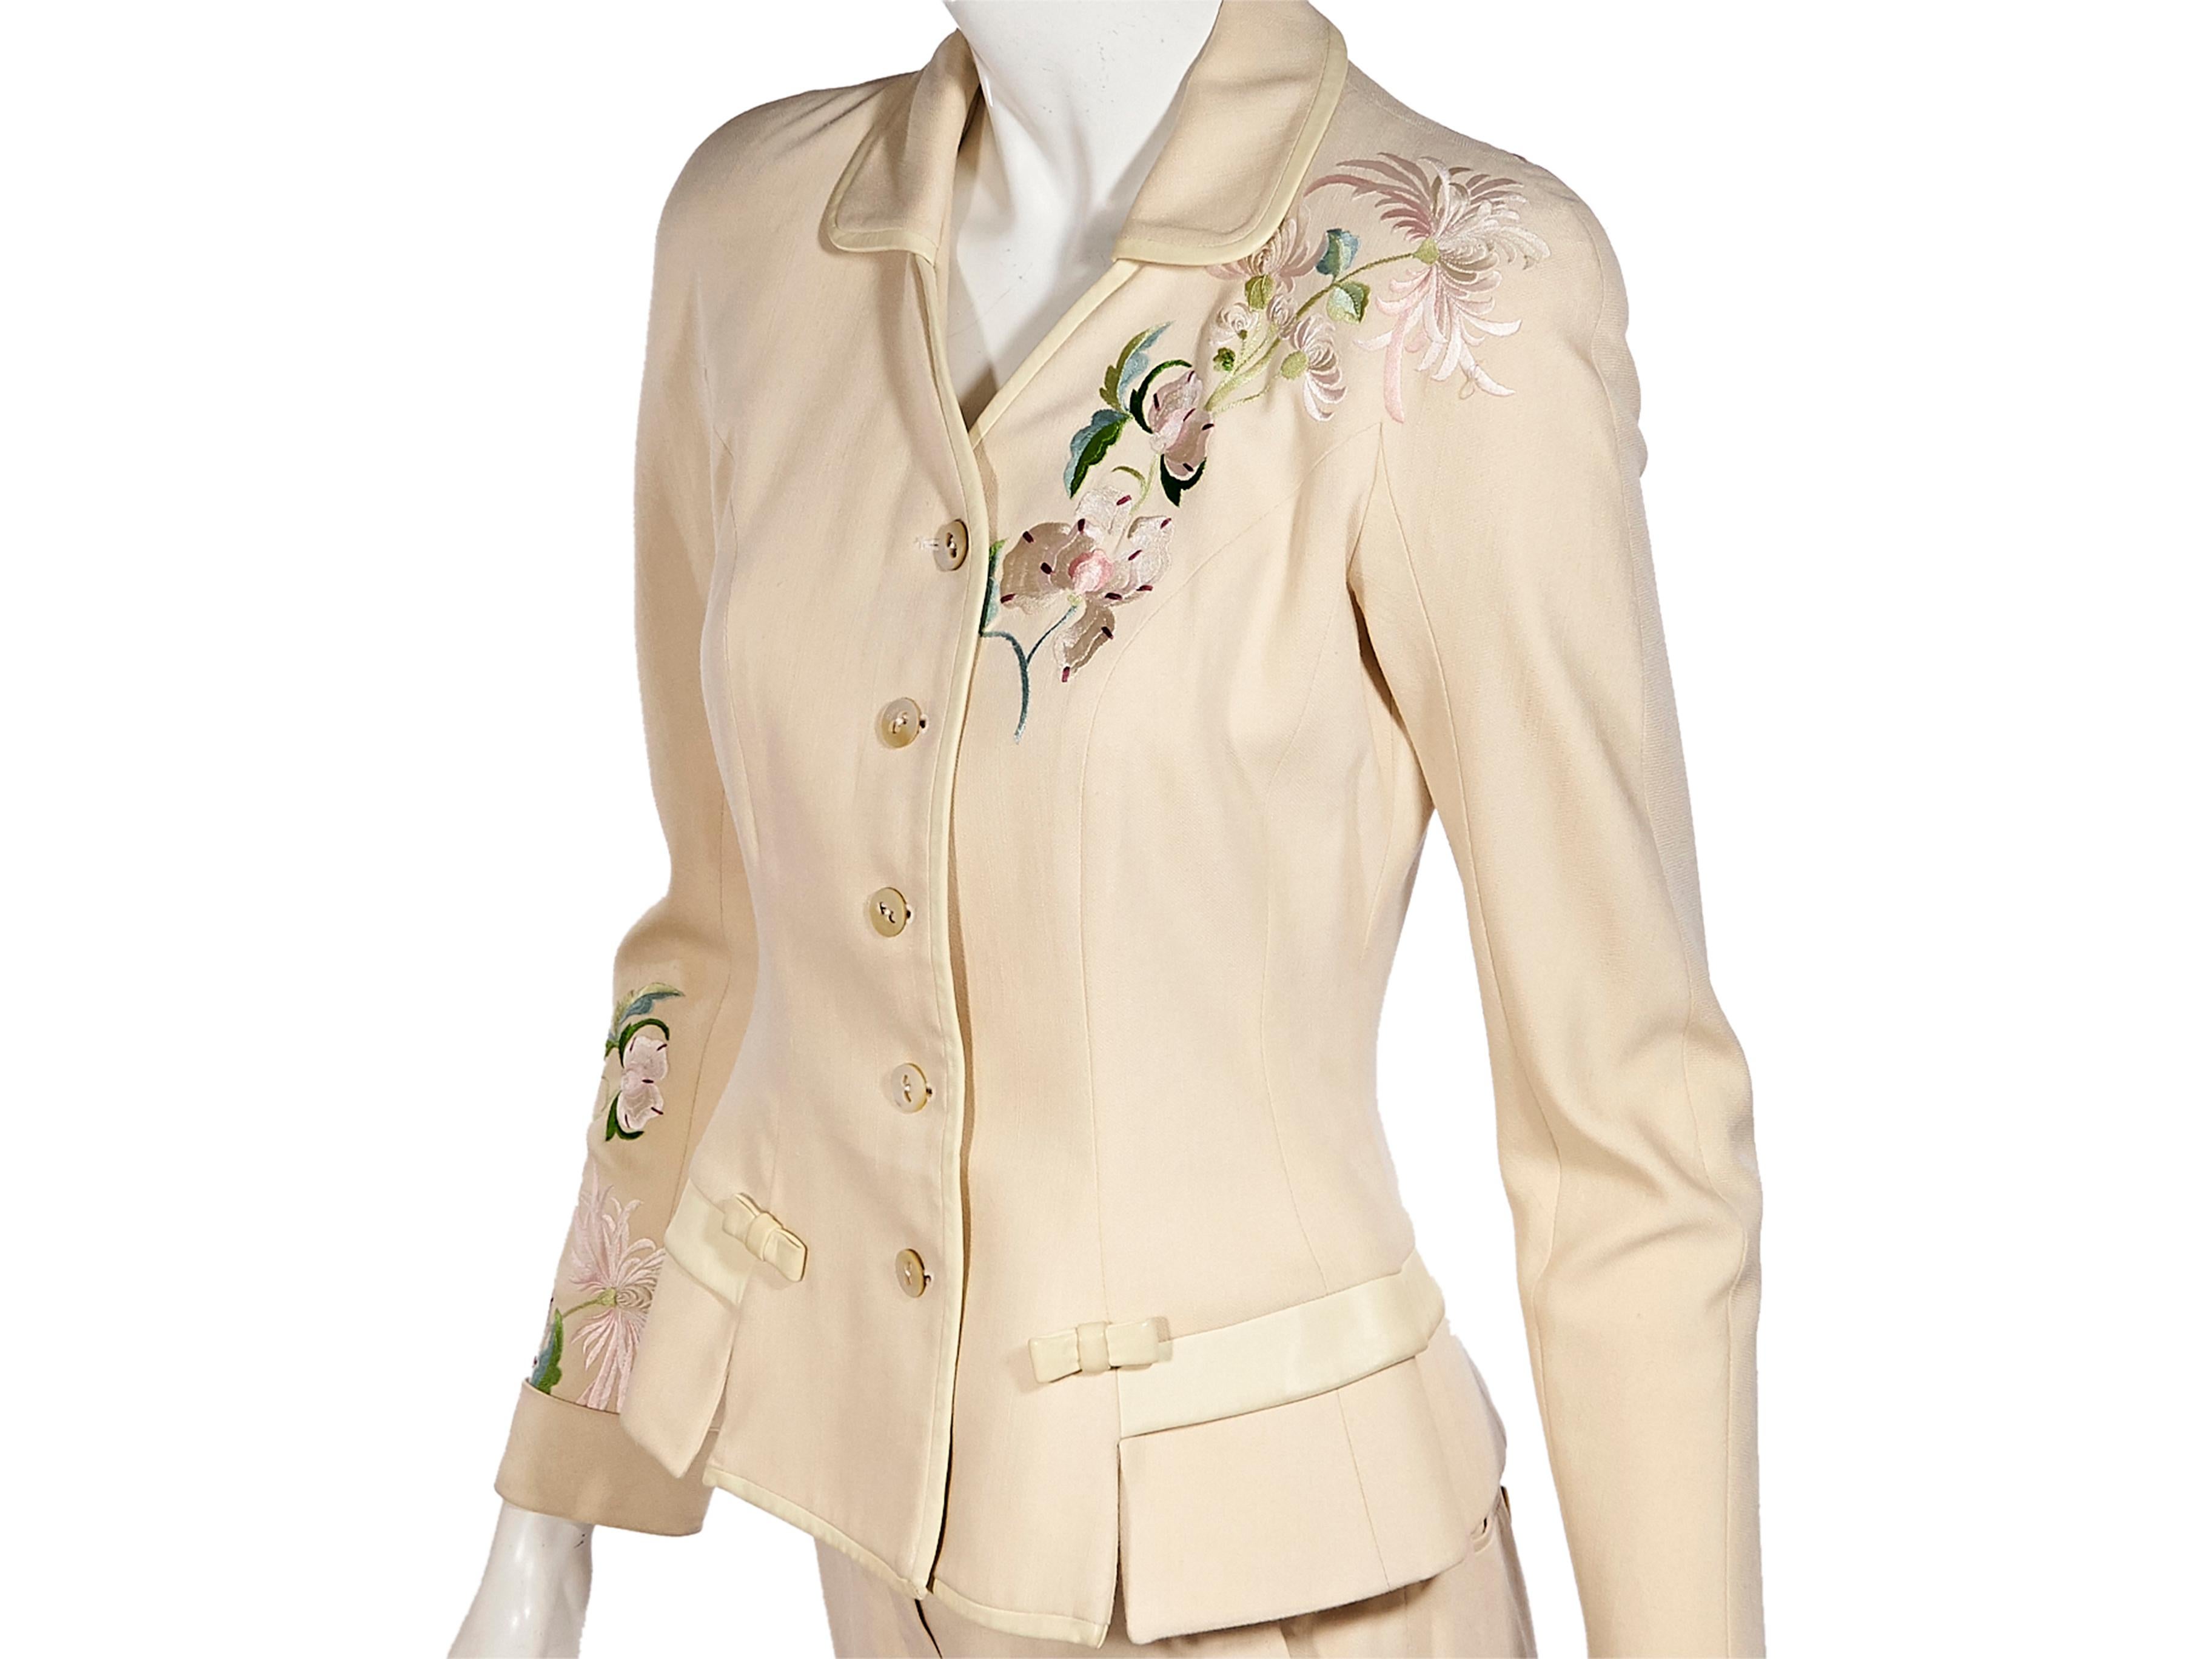 Women's Christian Dior Silk Cream Floral-Embroidered Suit